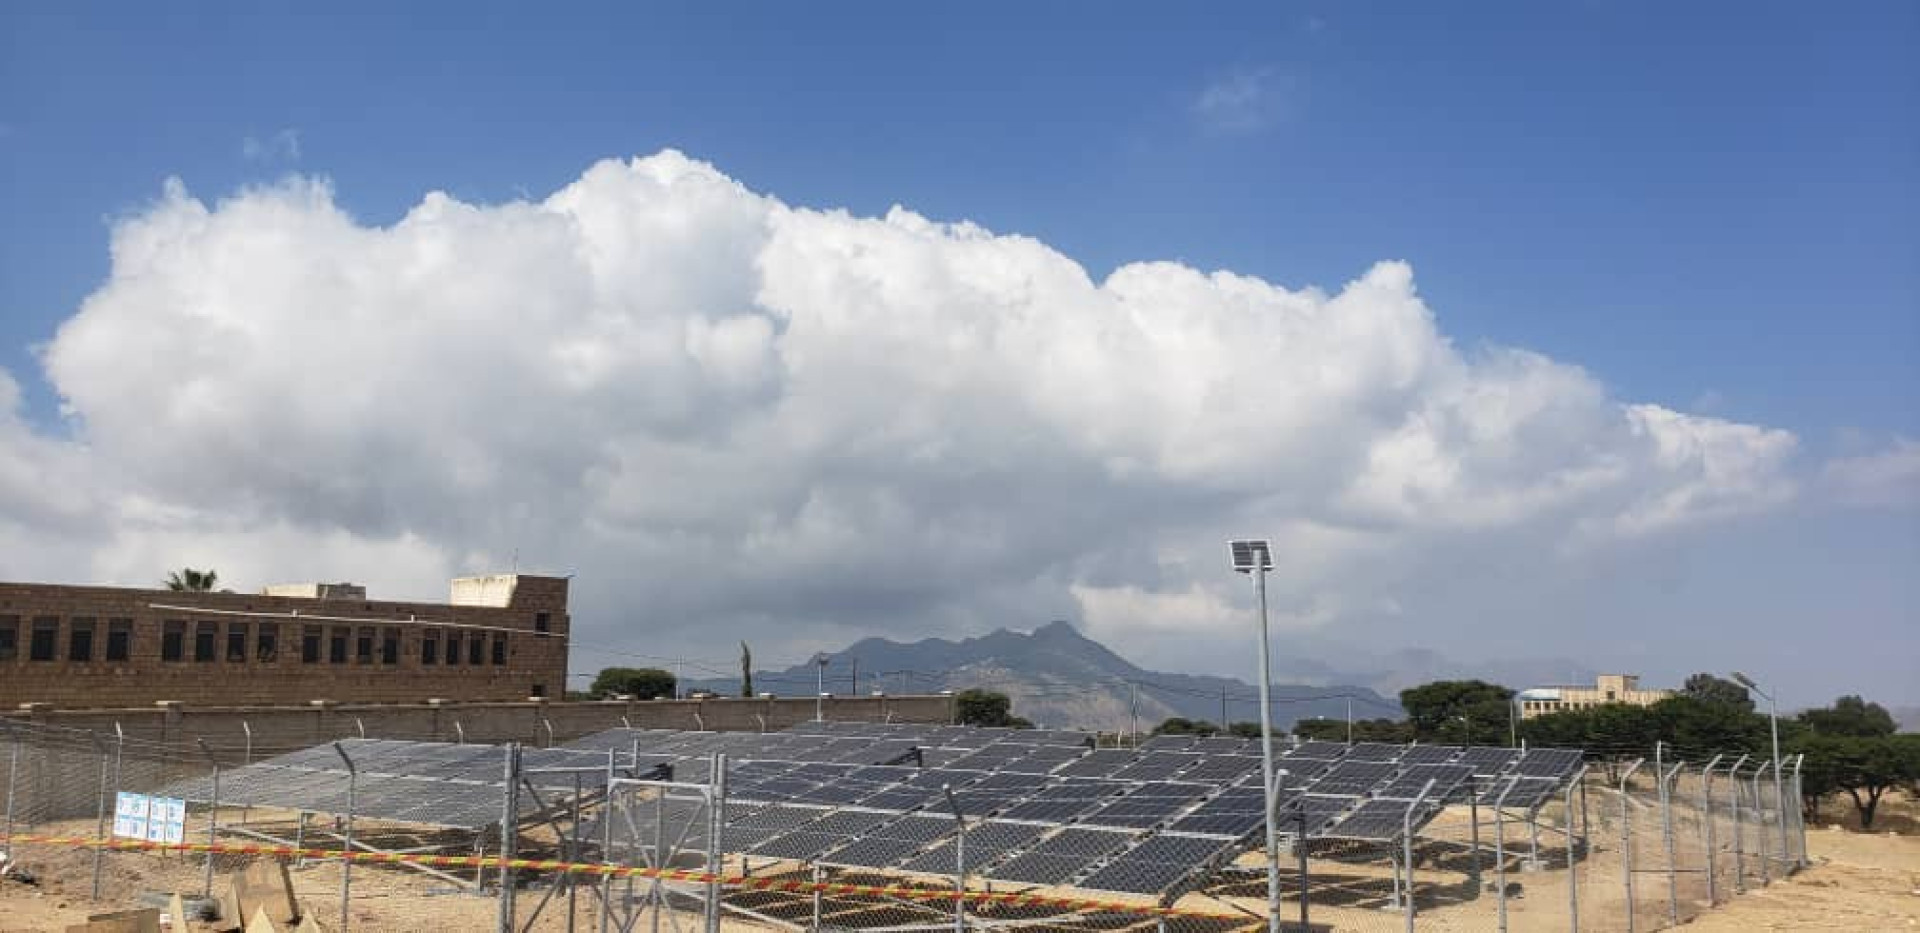 Supply, Installation, Testing, and Commissioning of solar pumping system with a capacity of 52.8kw to Al Ma'afer Well, Taiz Governorate. (Well Code: TAZ-A)